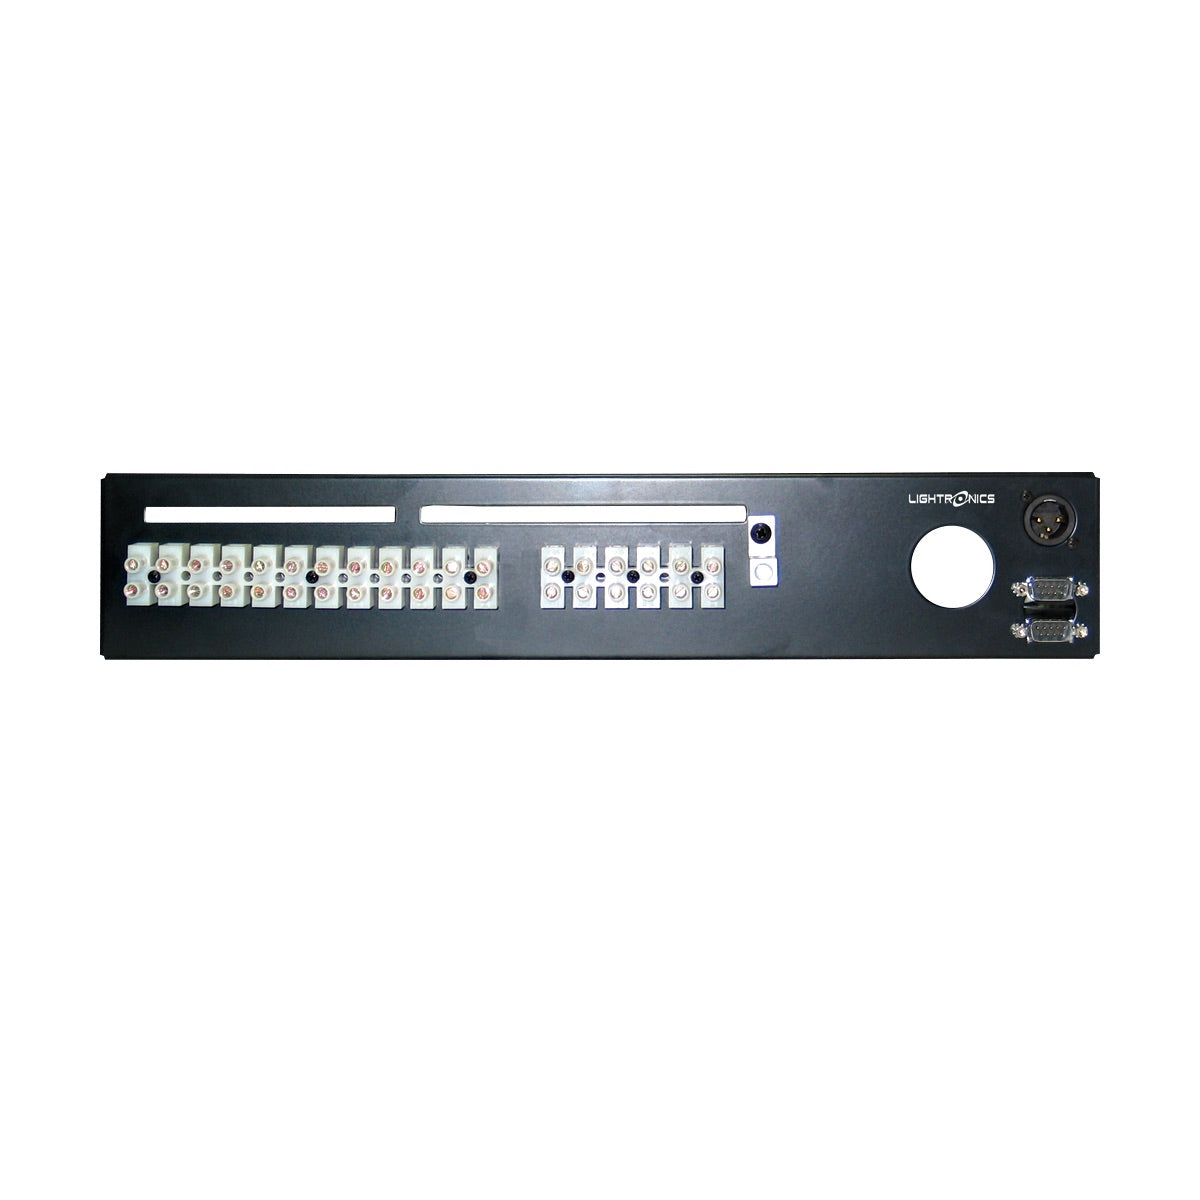 Lightronics RE82D Rack Mount Dimmer, RE Series, rear Terminal/Barrier Connector Strip with Knockout Cover